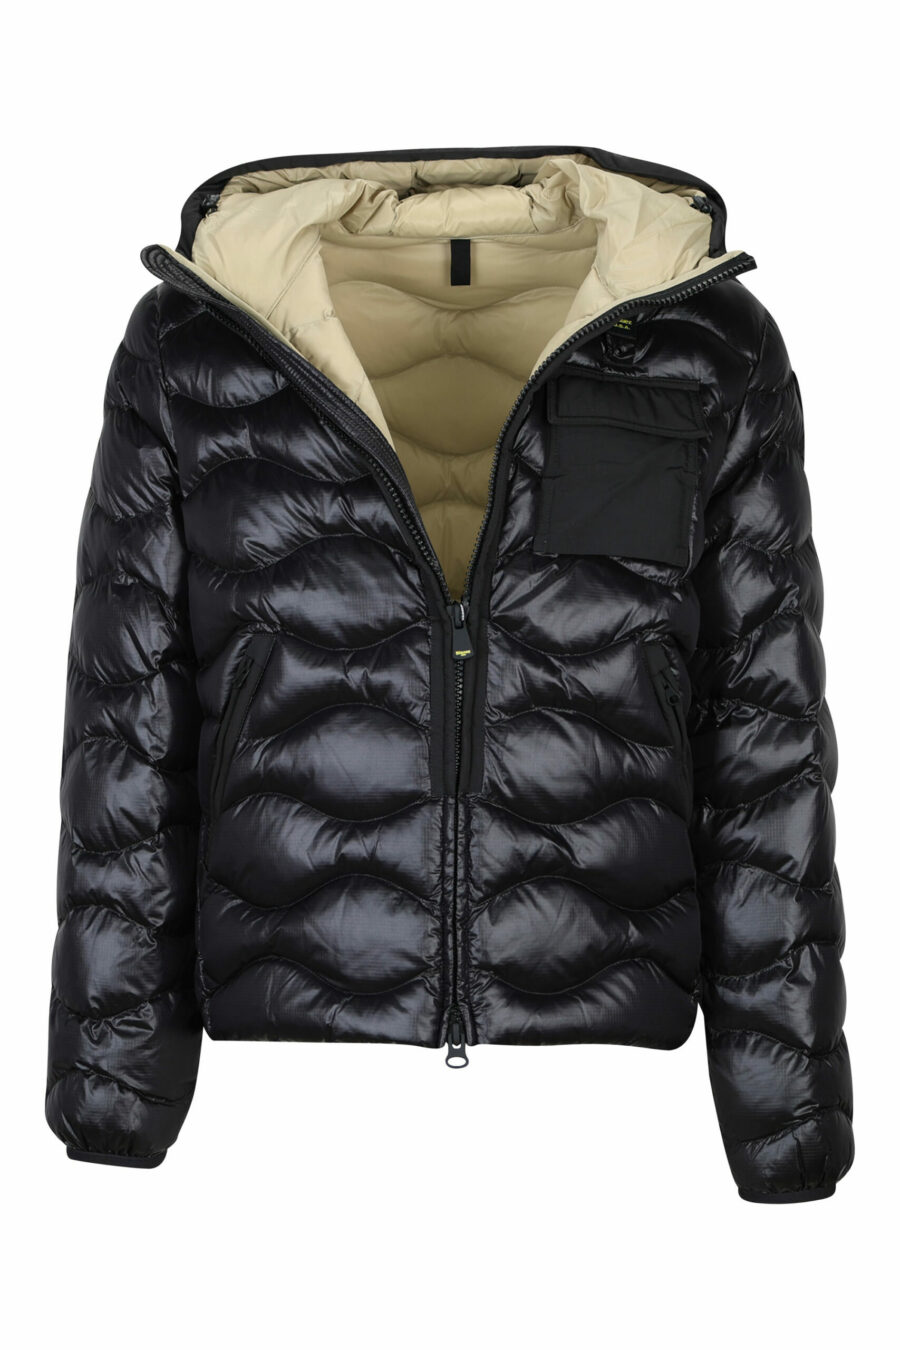 Black hooded hooded jacket with wavy lines and beige lining - 8058610682729 1 scaled